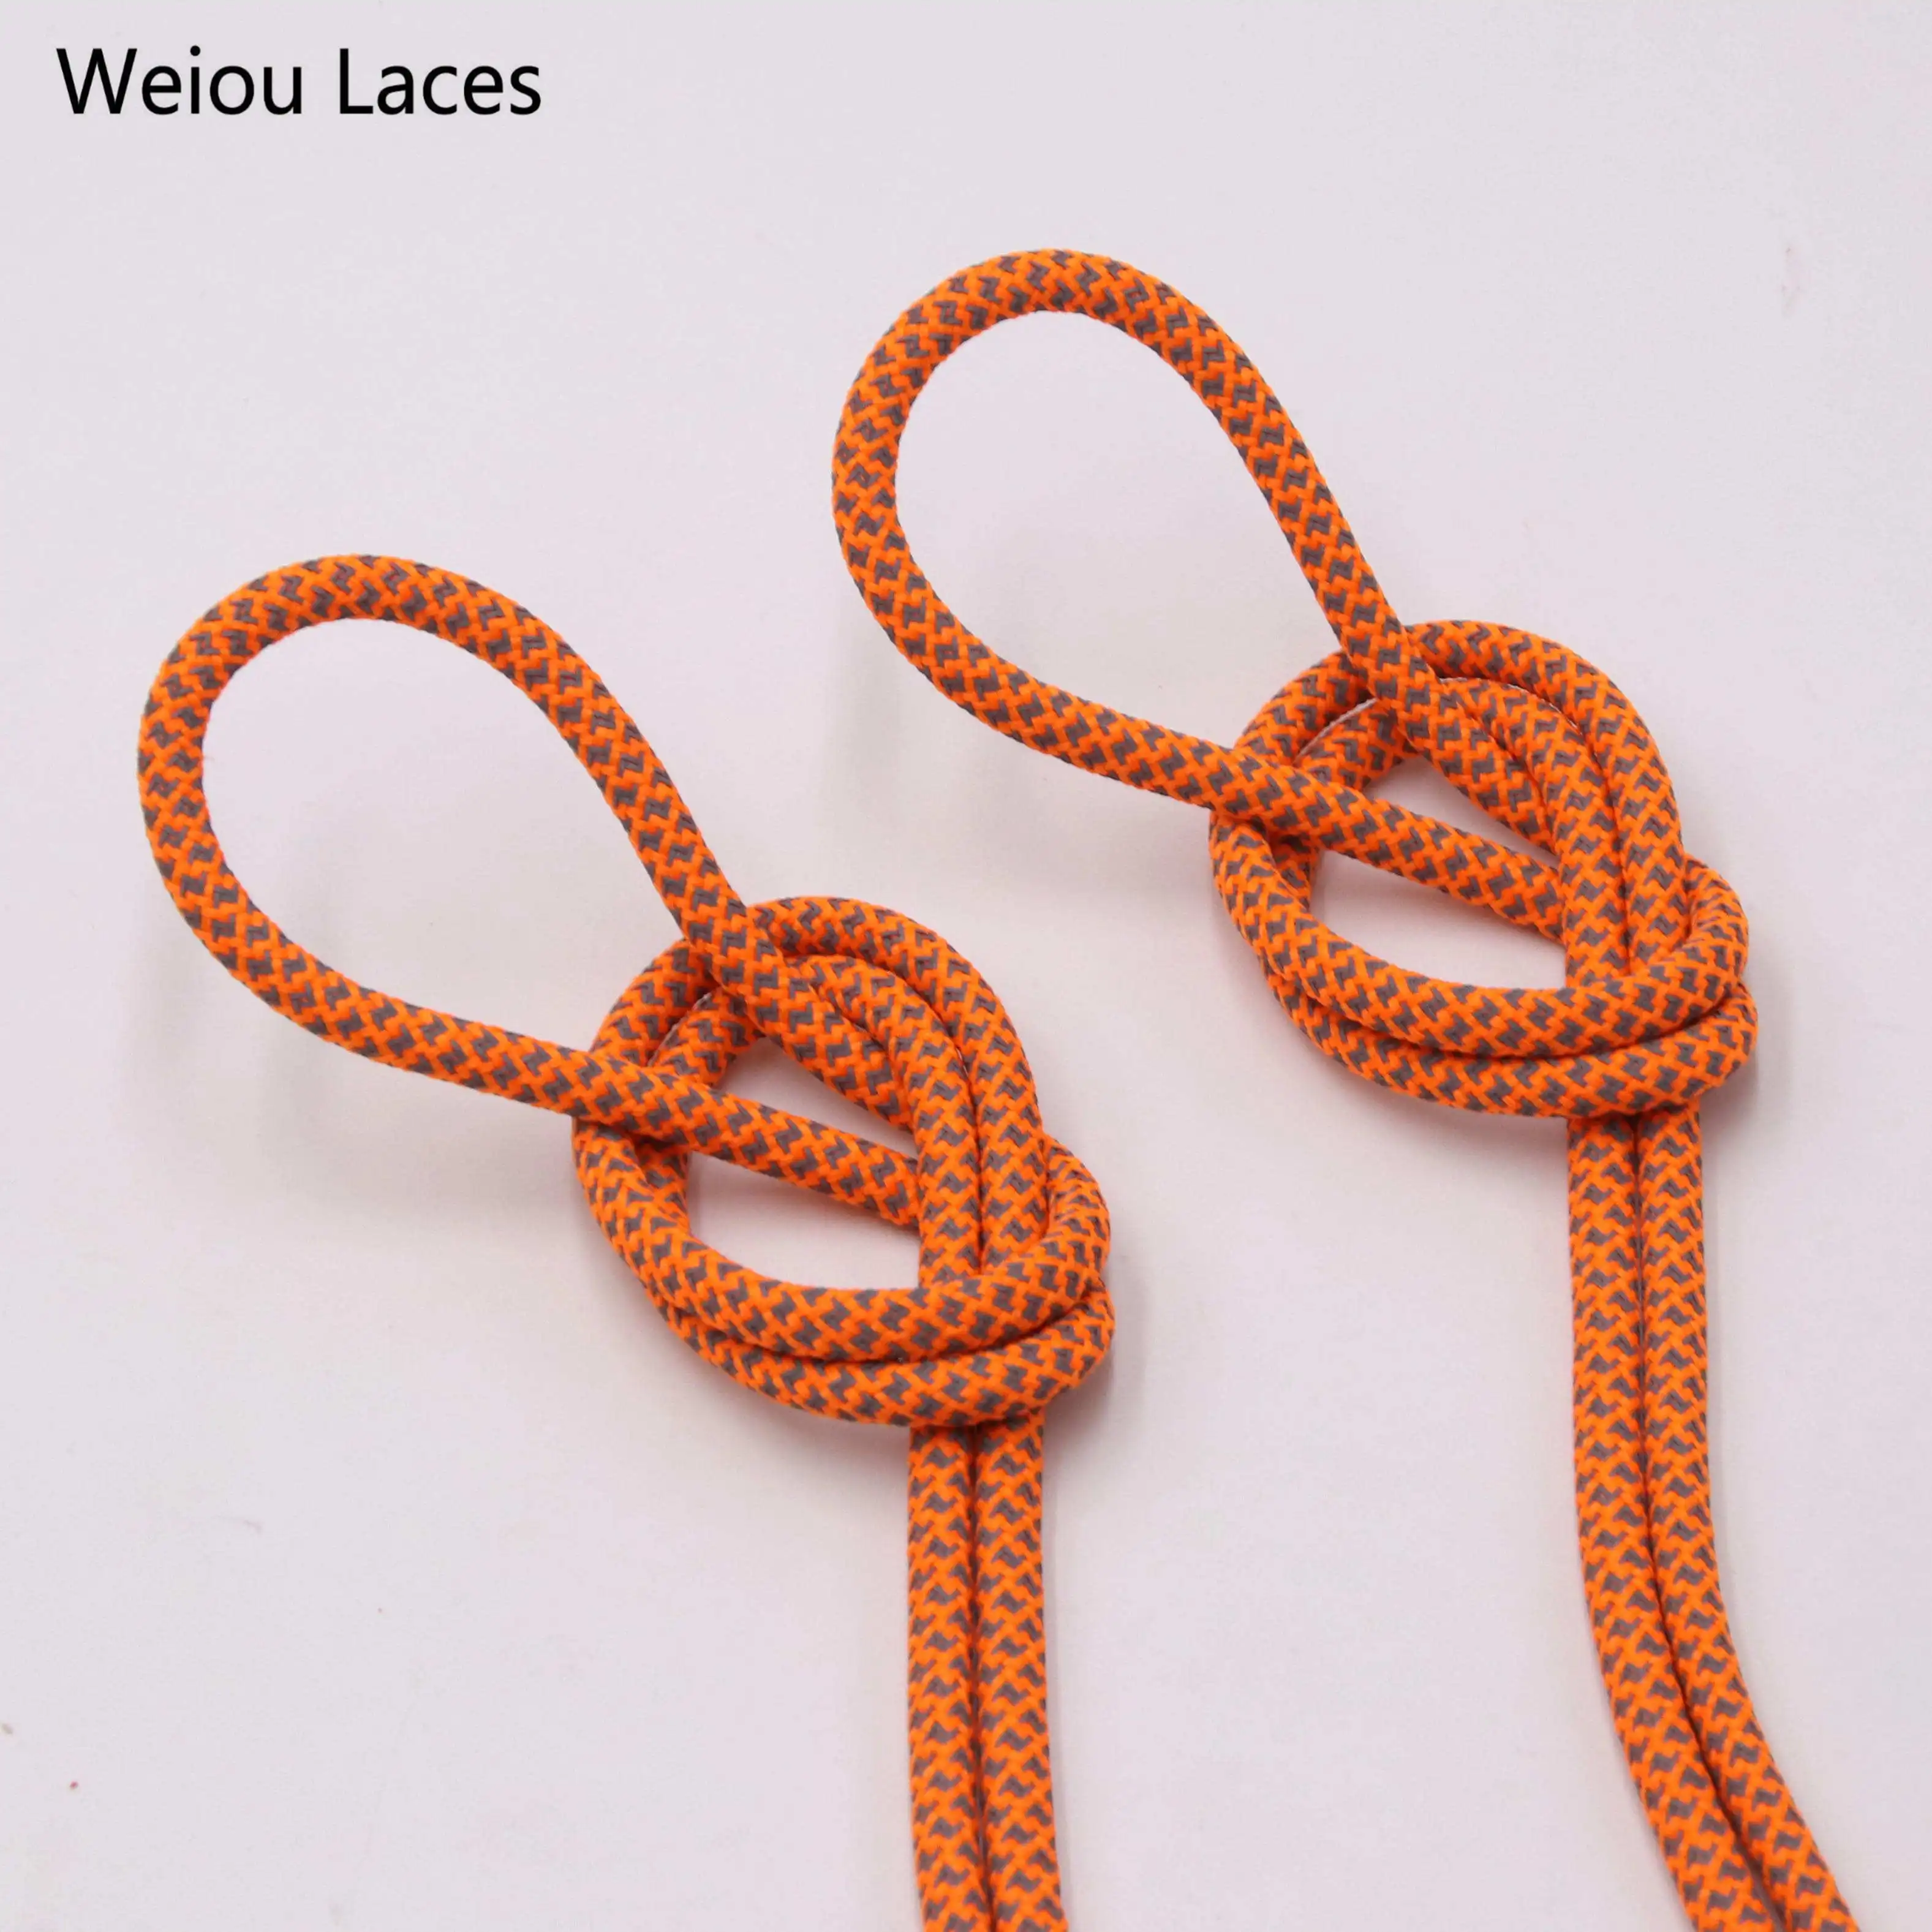 

Weiou laces Polyester Round Reflective Athletic Shoelaces for Night Basketball Shoestrings Safety Adult Kids Laces Sport, 3m grey+polyester color